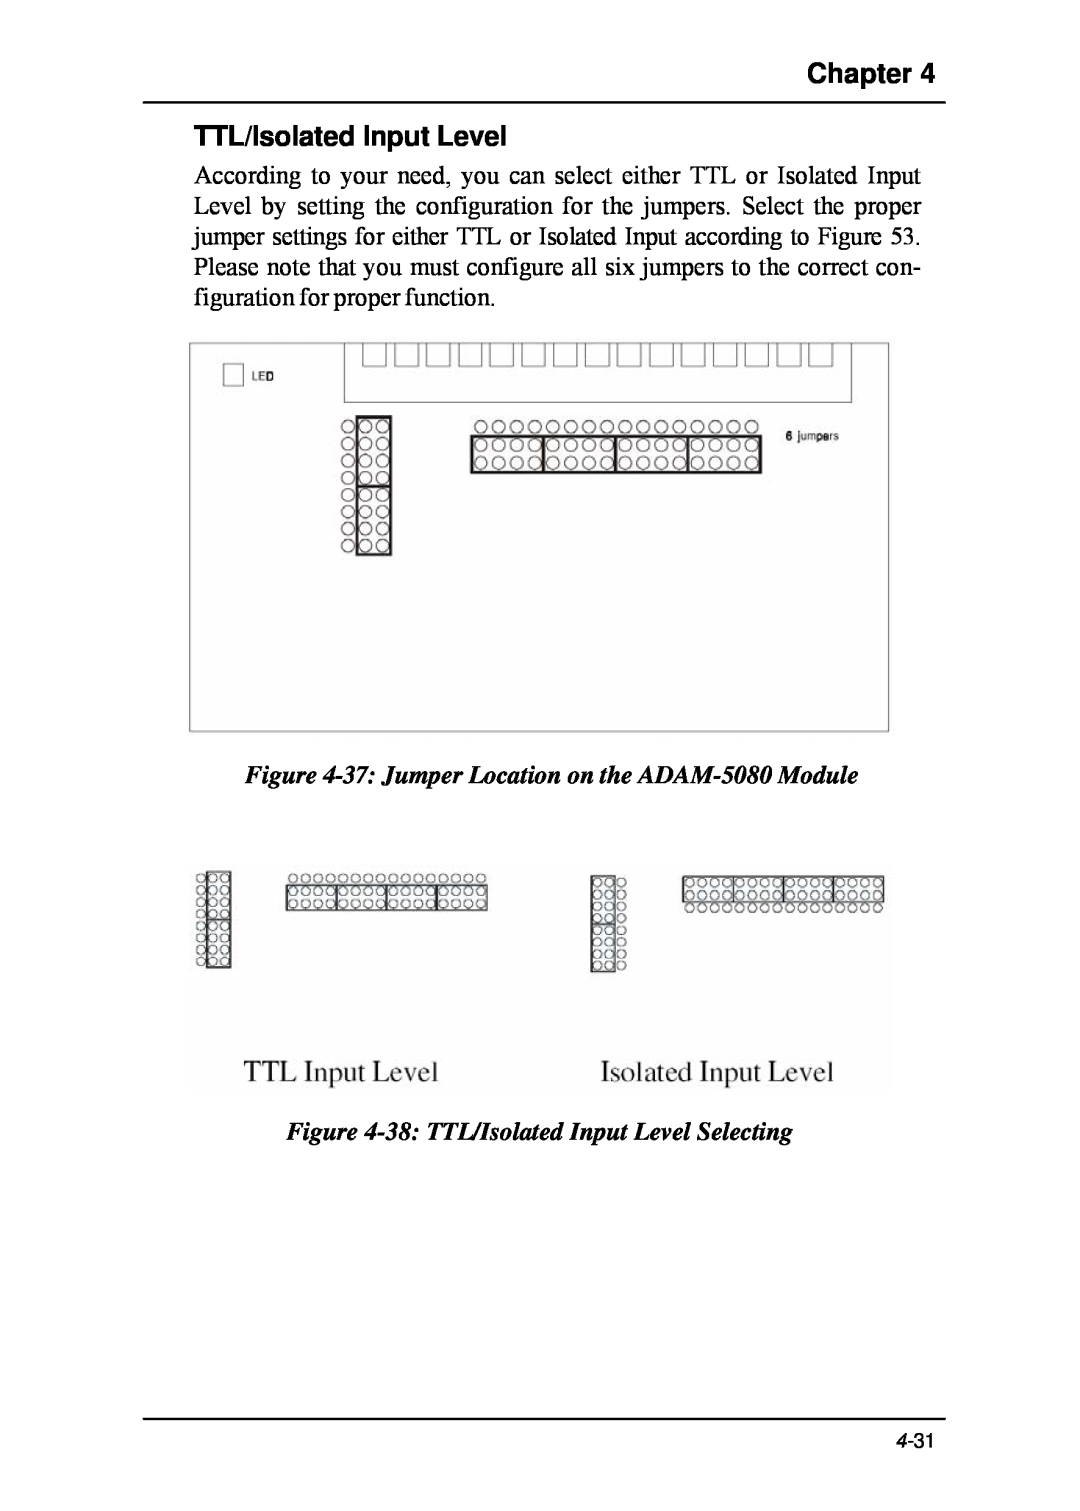 B&B Electronics 5000 Series user manual Chapter TTL/Isolated Input Level, 37 Jumper Location on the ADAM-5080 Module 